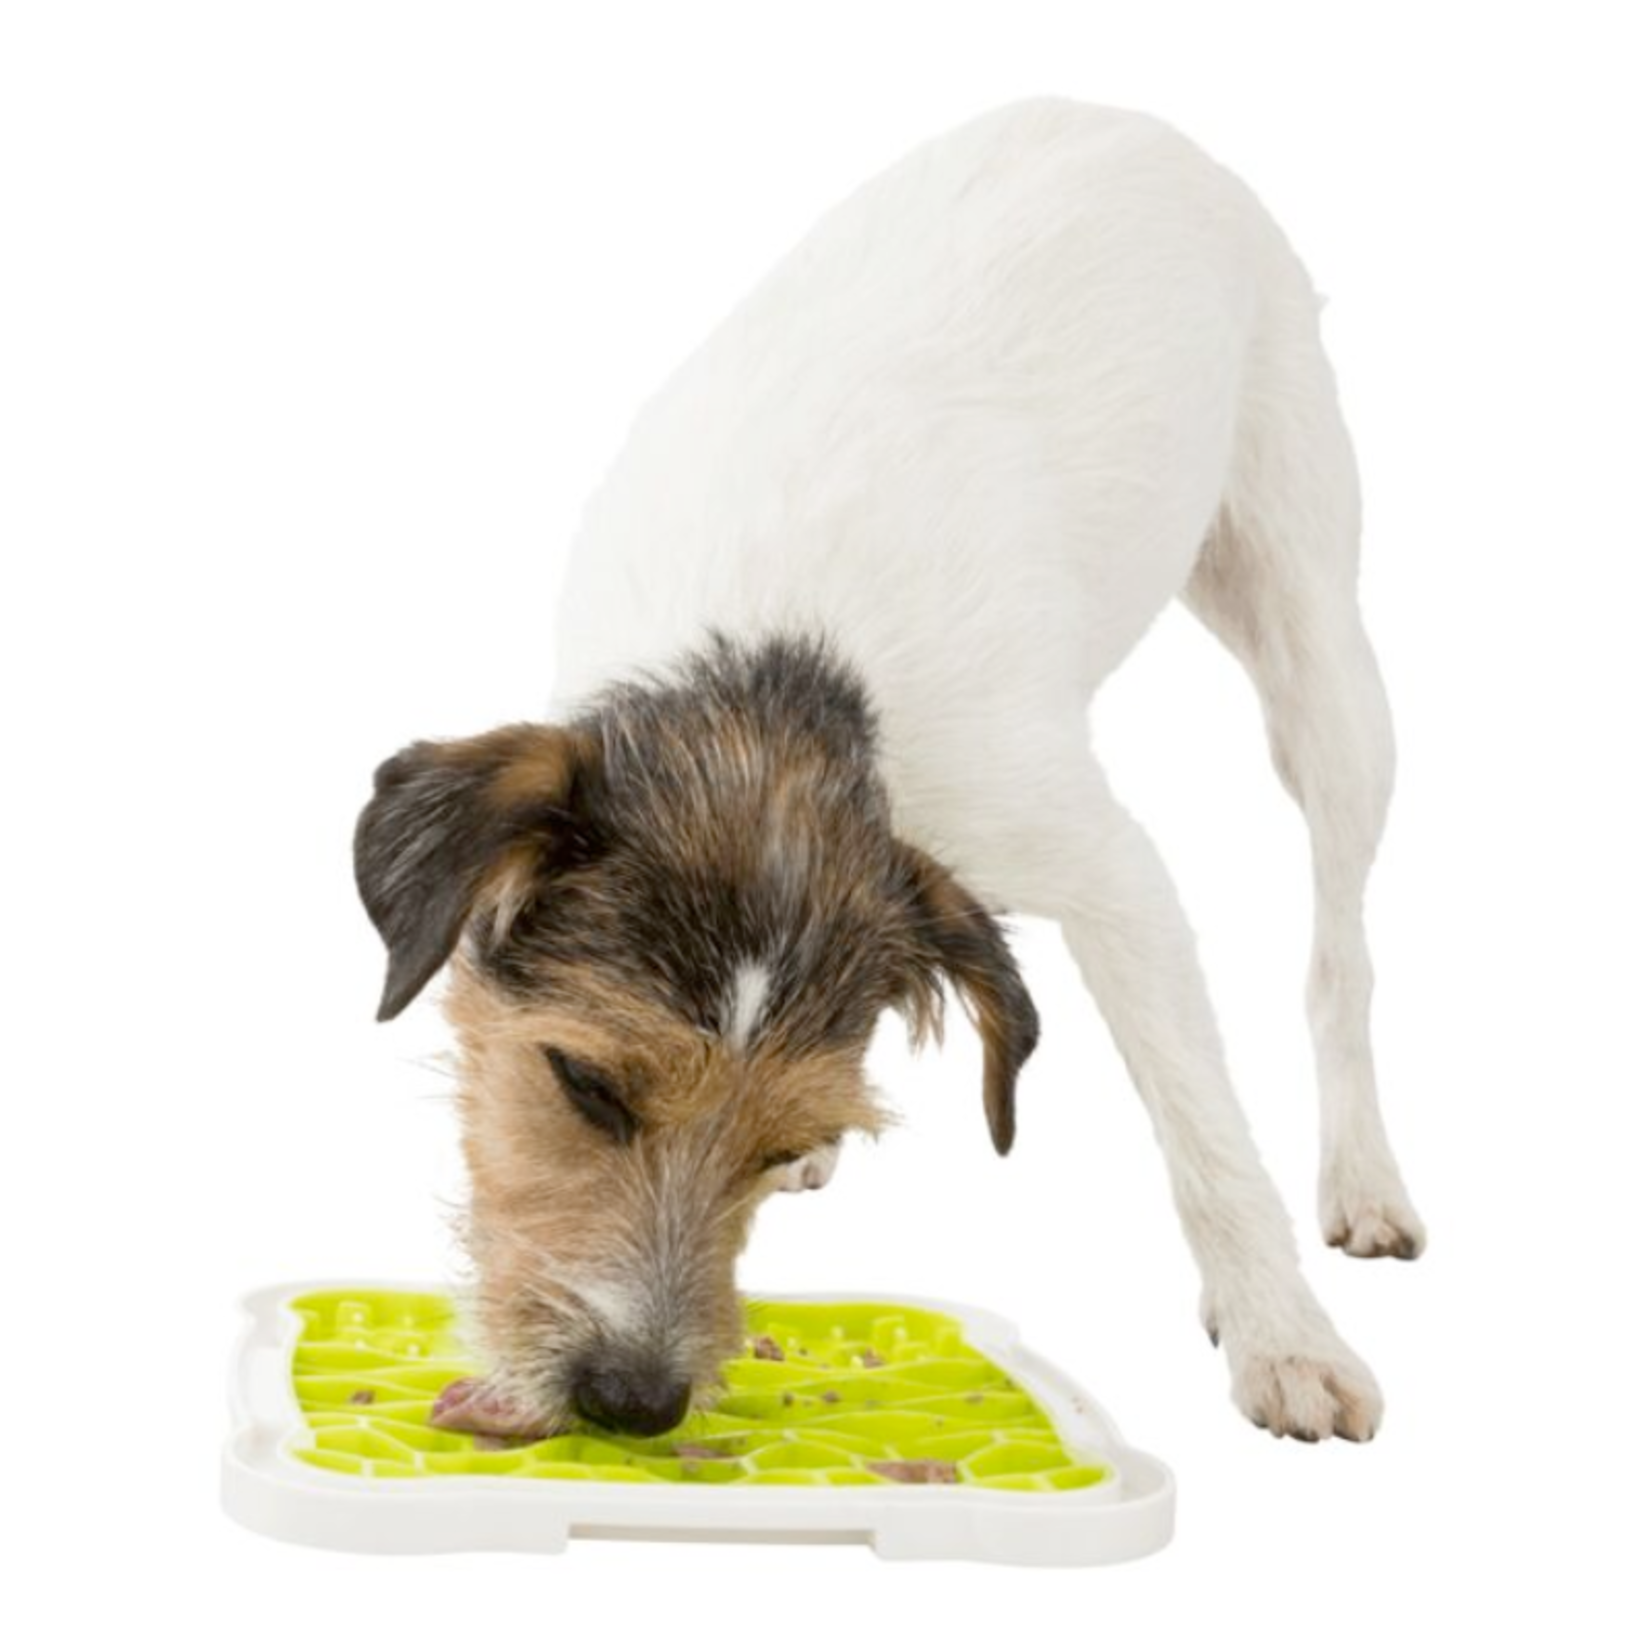 Trixie 8” - Lick’n'Snack Licking Plate - Trixie